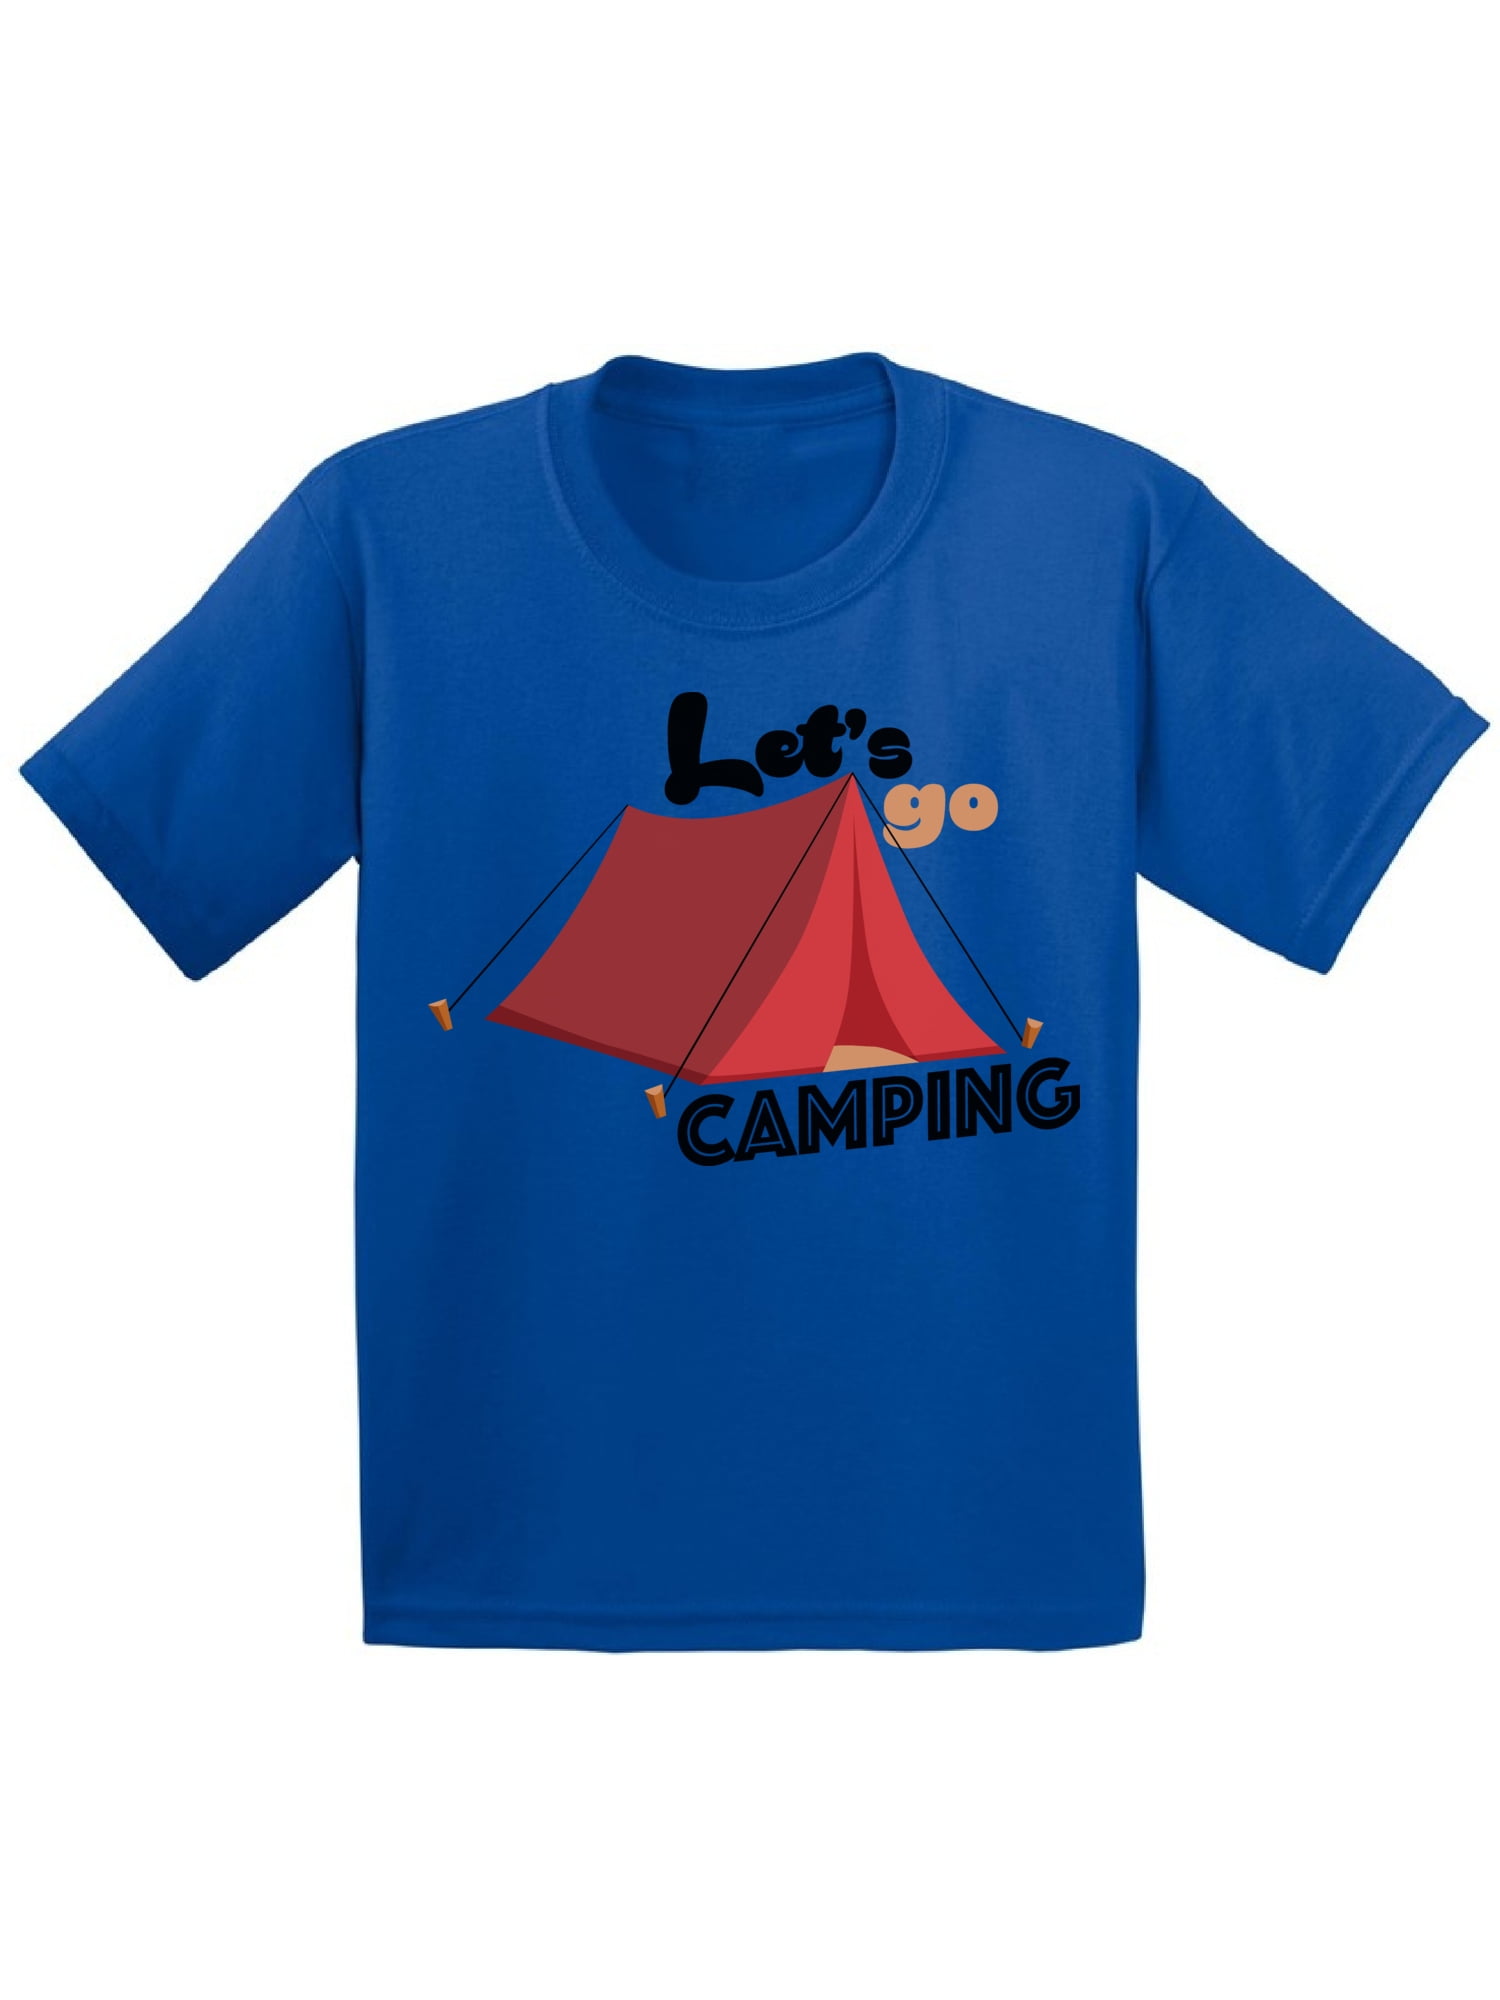 Clothing Unisex Kids Clothing Tops & Tees T-shirts Graphic Tees Childrens Camping T-Shirts 'Camp Life' 